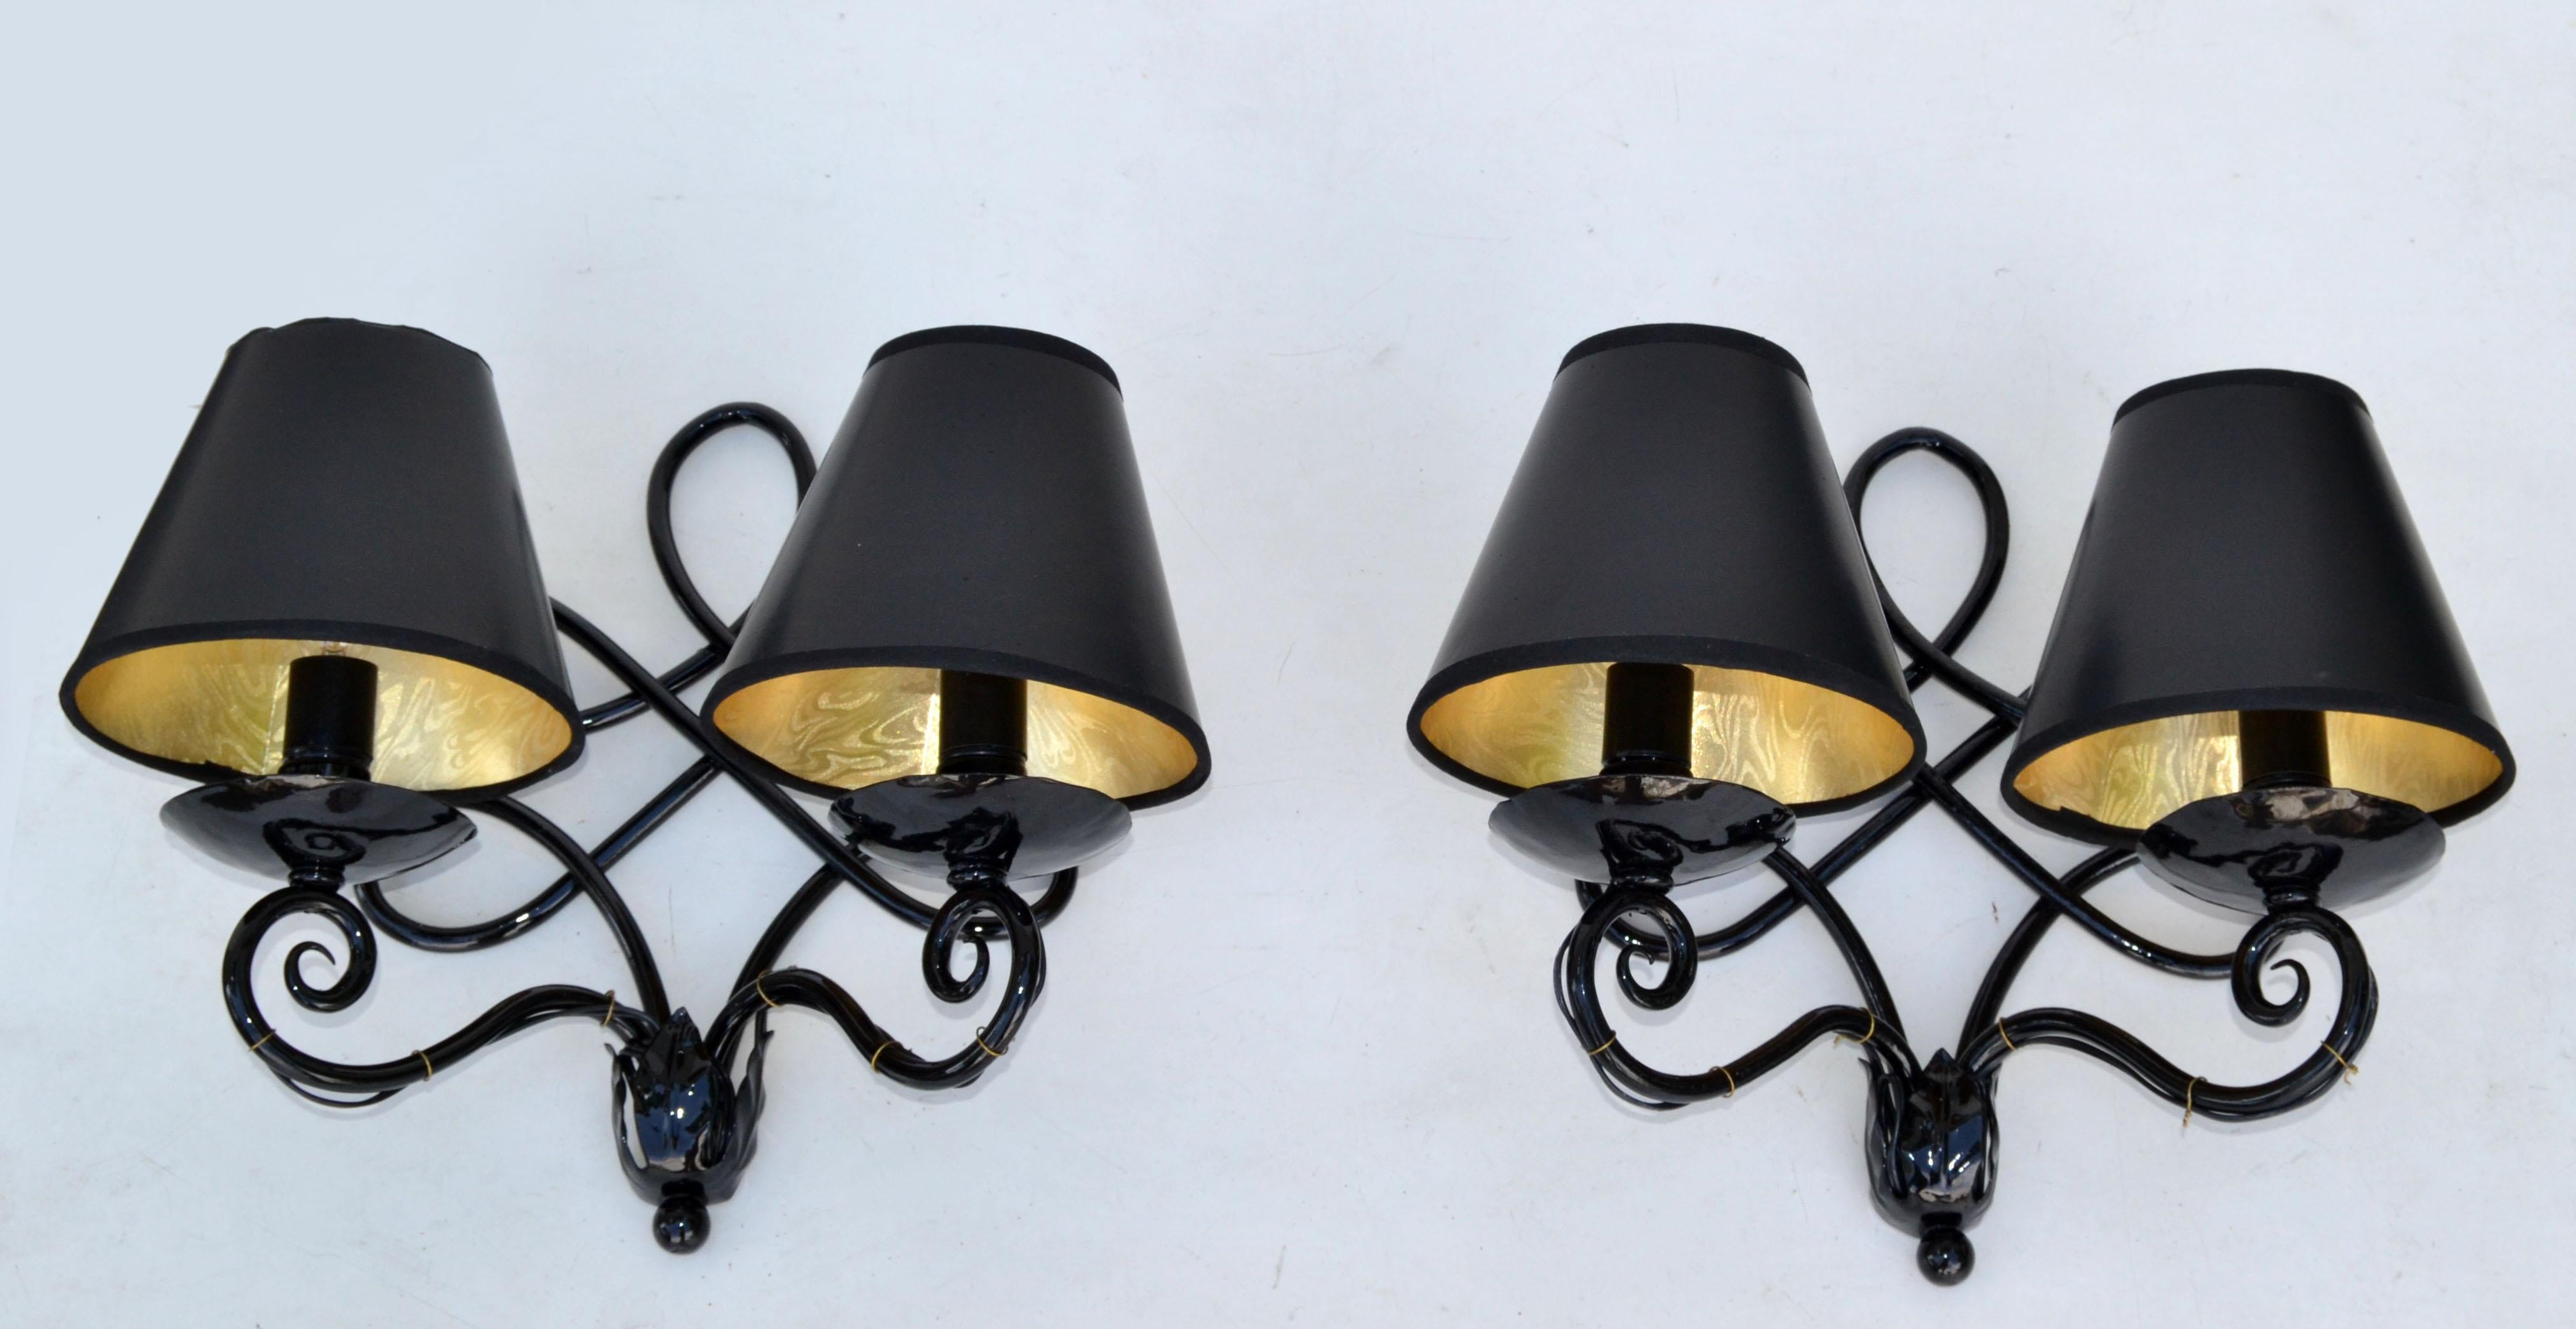 Mid-20th Century 1940 French 2 Lights Wrought Iron Wall Sconces Black Gloss Finish Art Deco, Pair